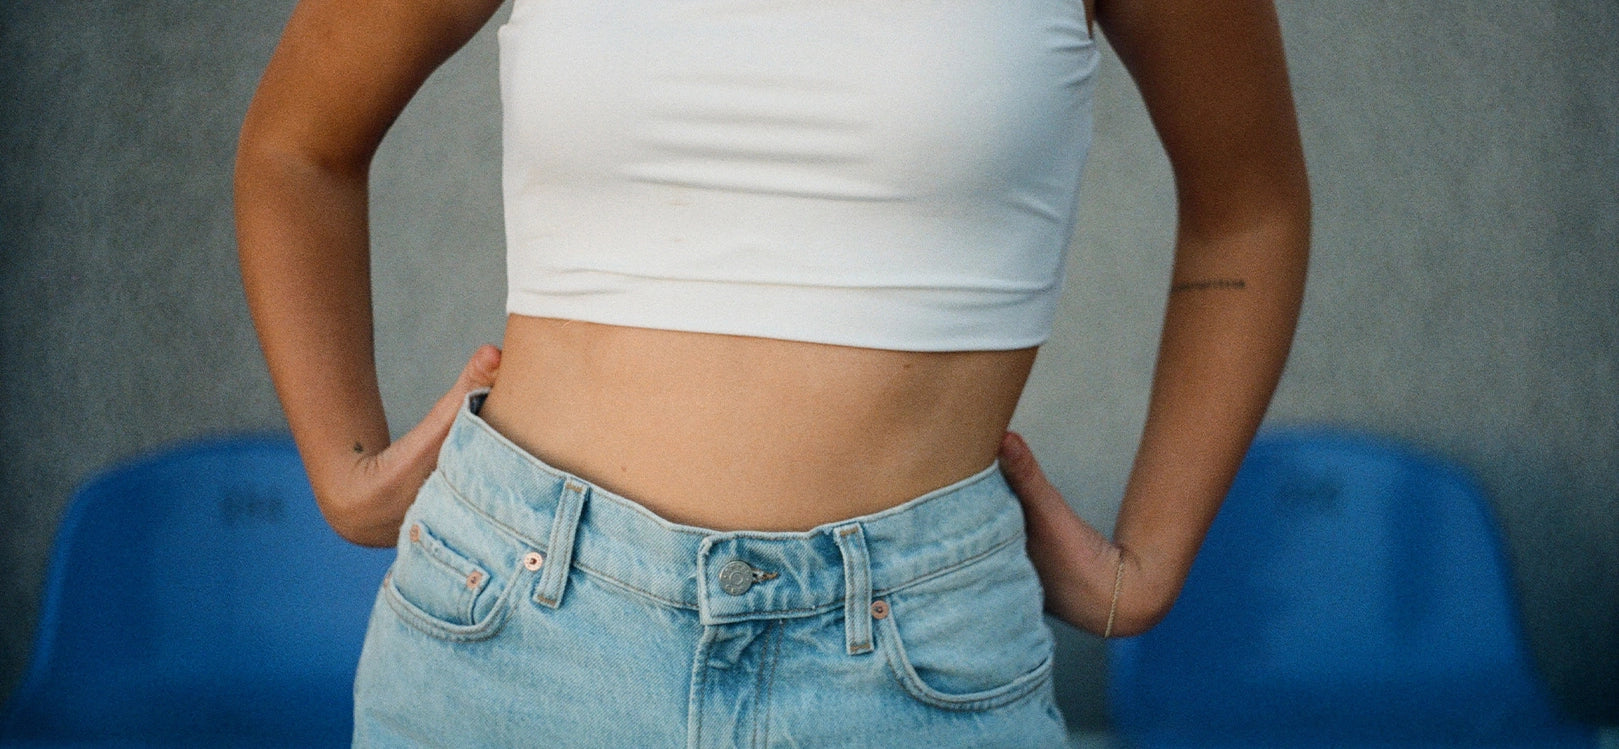 Mid-shot of woman's midriff with white crop top and blue denim shorts